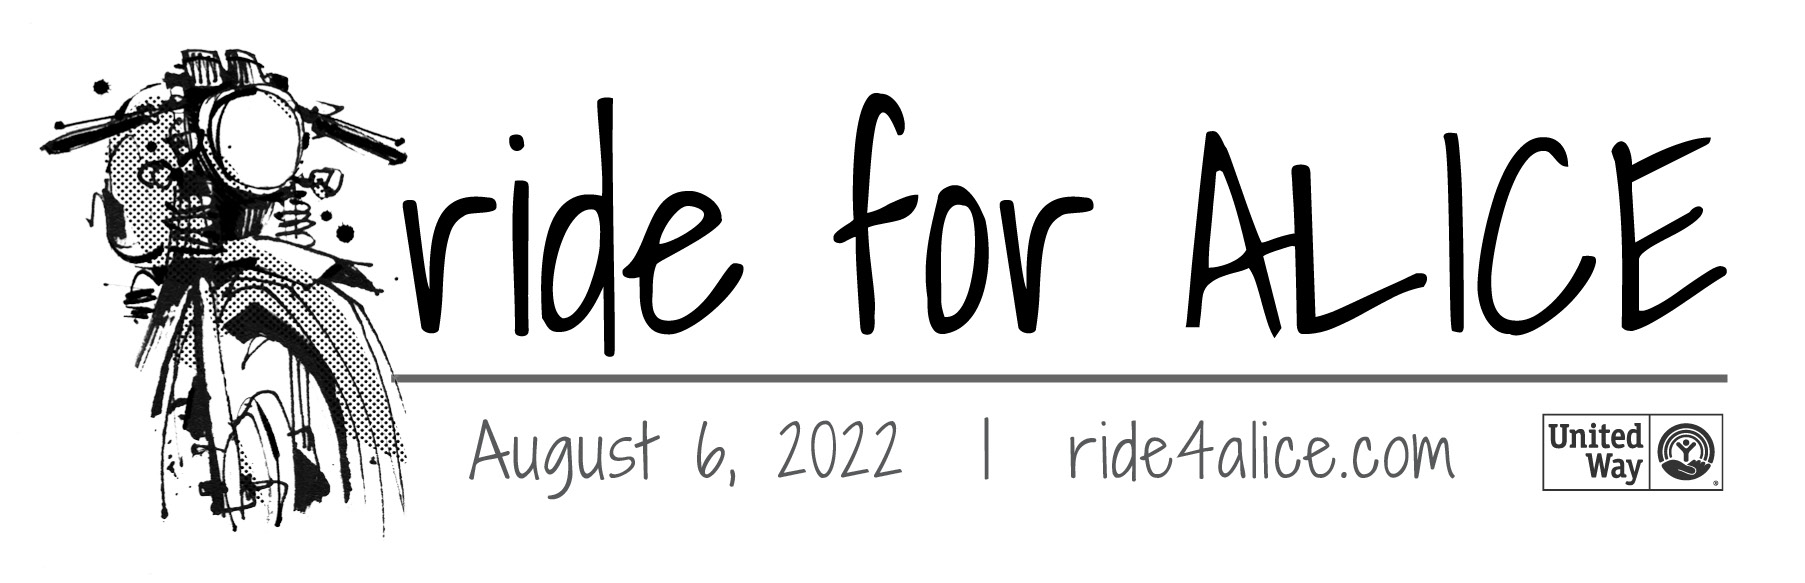 ride for alice